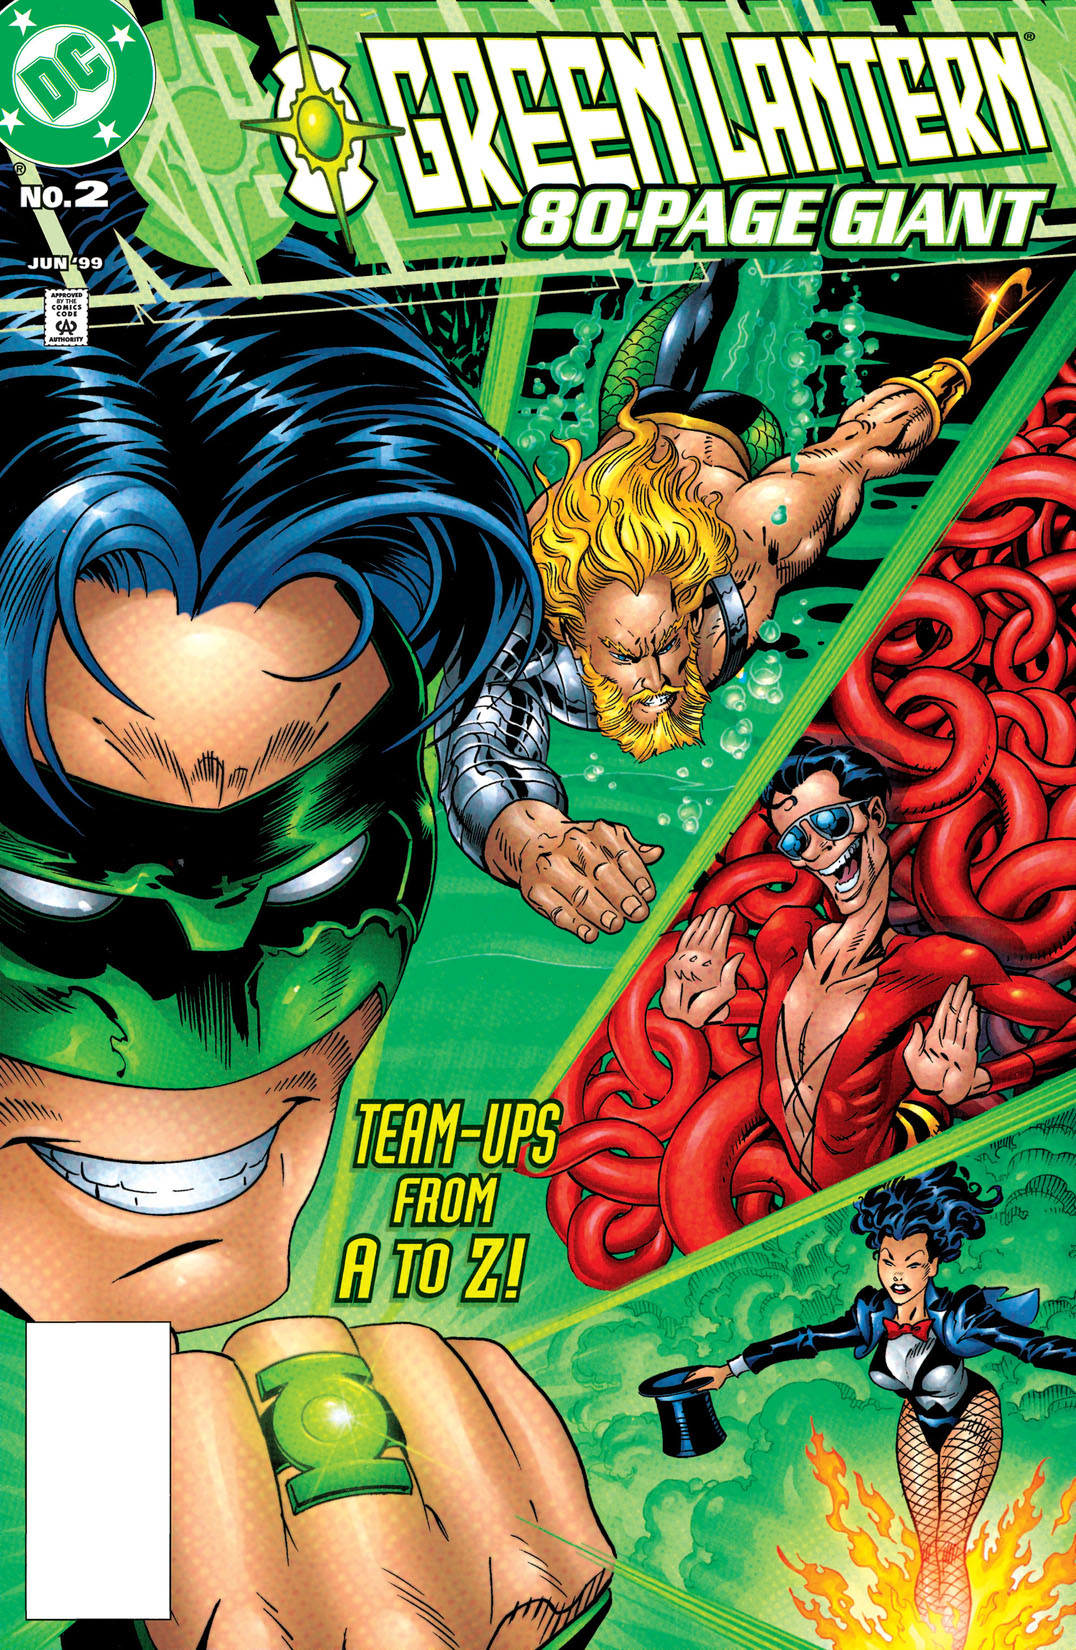 Green Lantern 80-Page Giant (1998-) #2 preview images